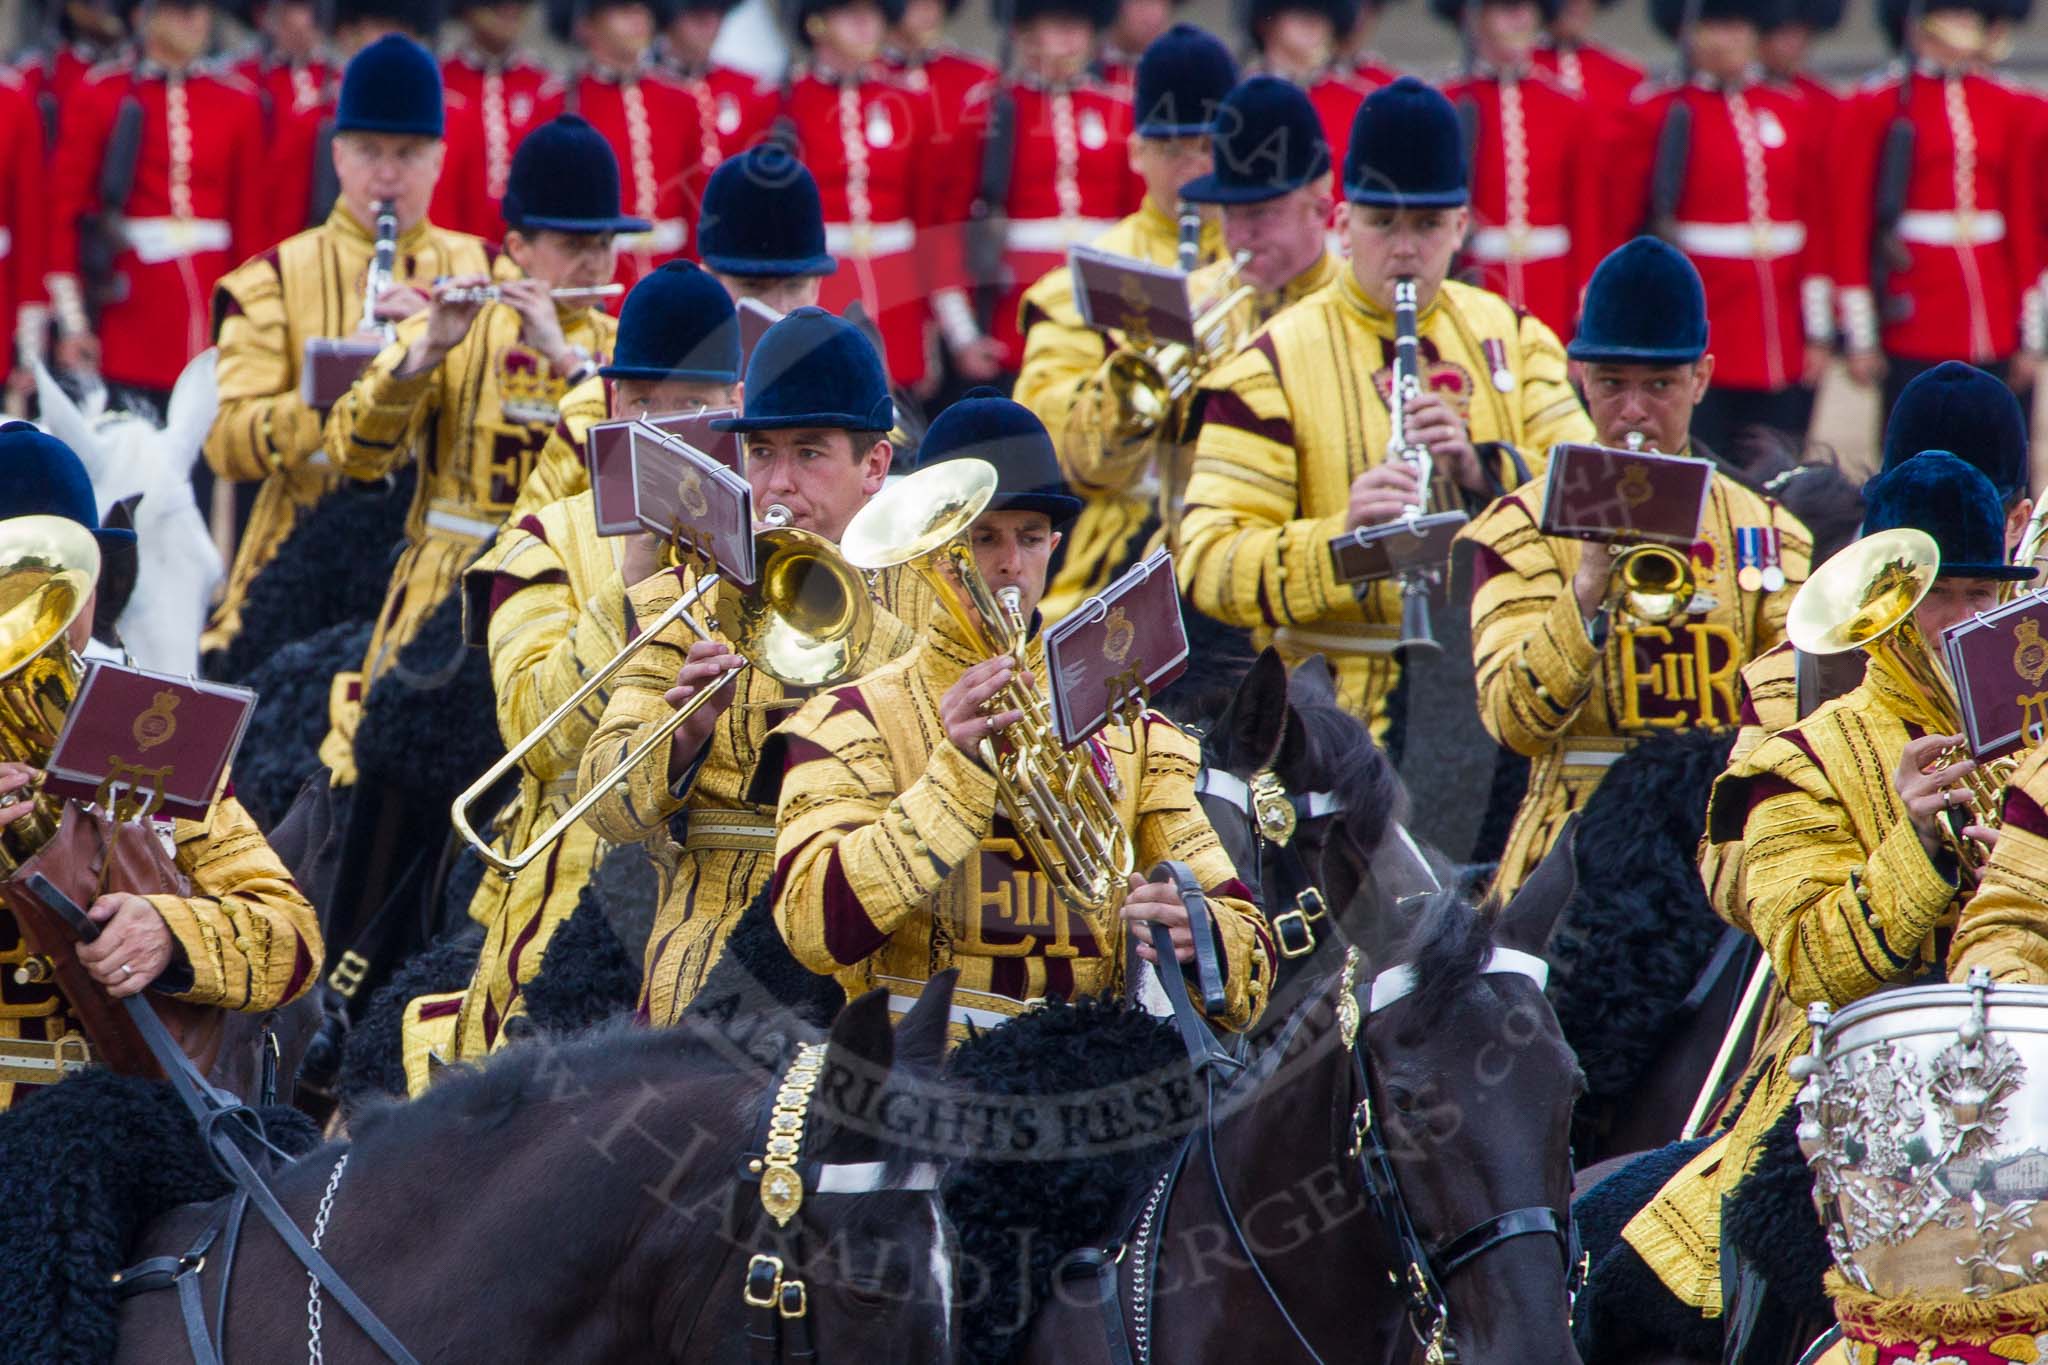 Trooping the Colour 2014.
Horse Guards Parade, Westminster,
London SW1A,

United Kingdom,
on 14 June 2014 at 11:55, image #745